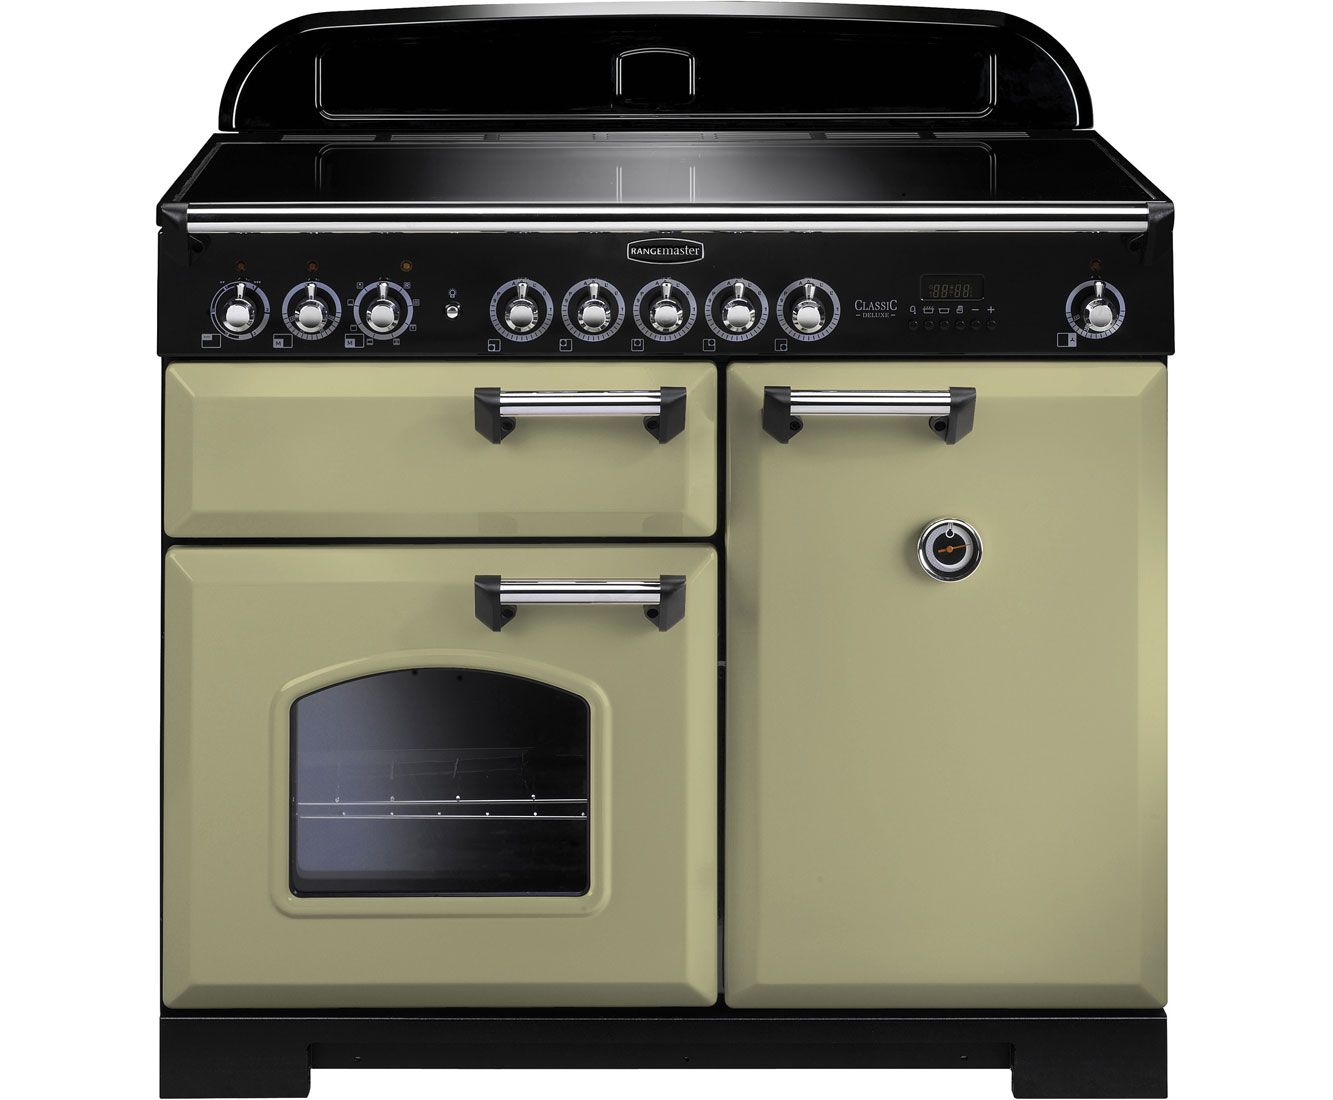 Rangemaster Classic Deluxe CDL100EIOG/C 100cm Electric Range Cooker with Induction Hob - Olive Green / Chrome - A/A Rated, Green